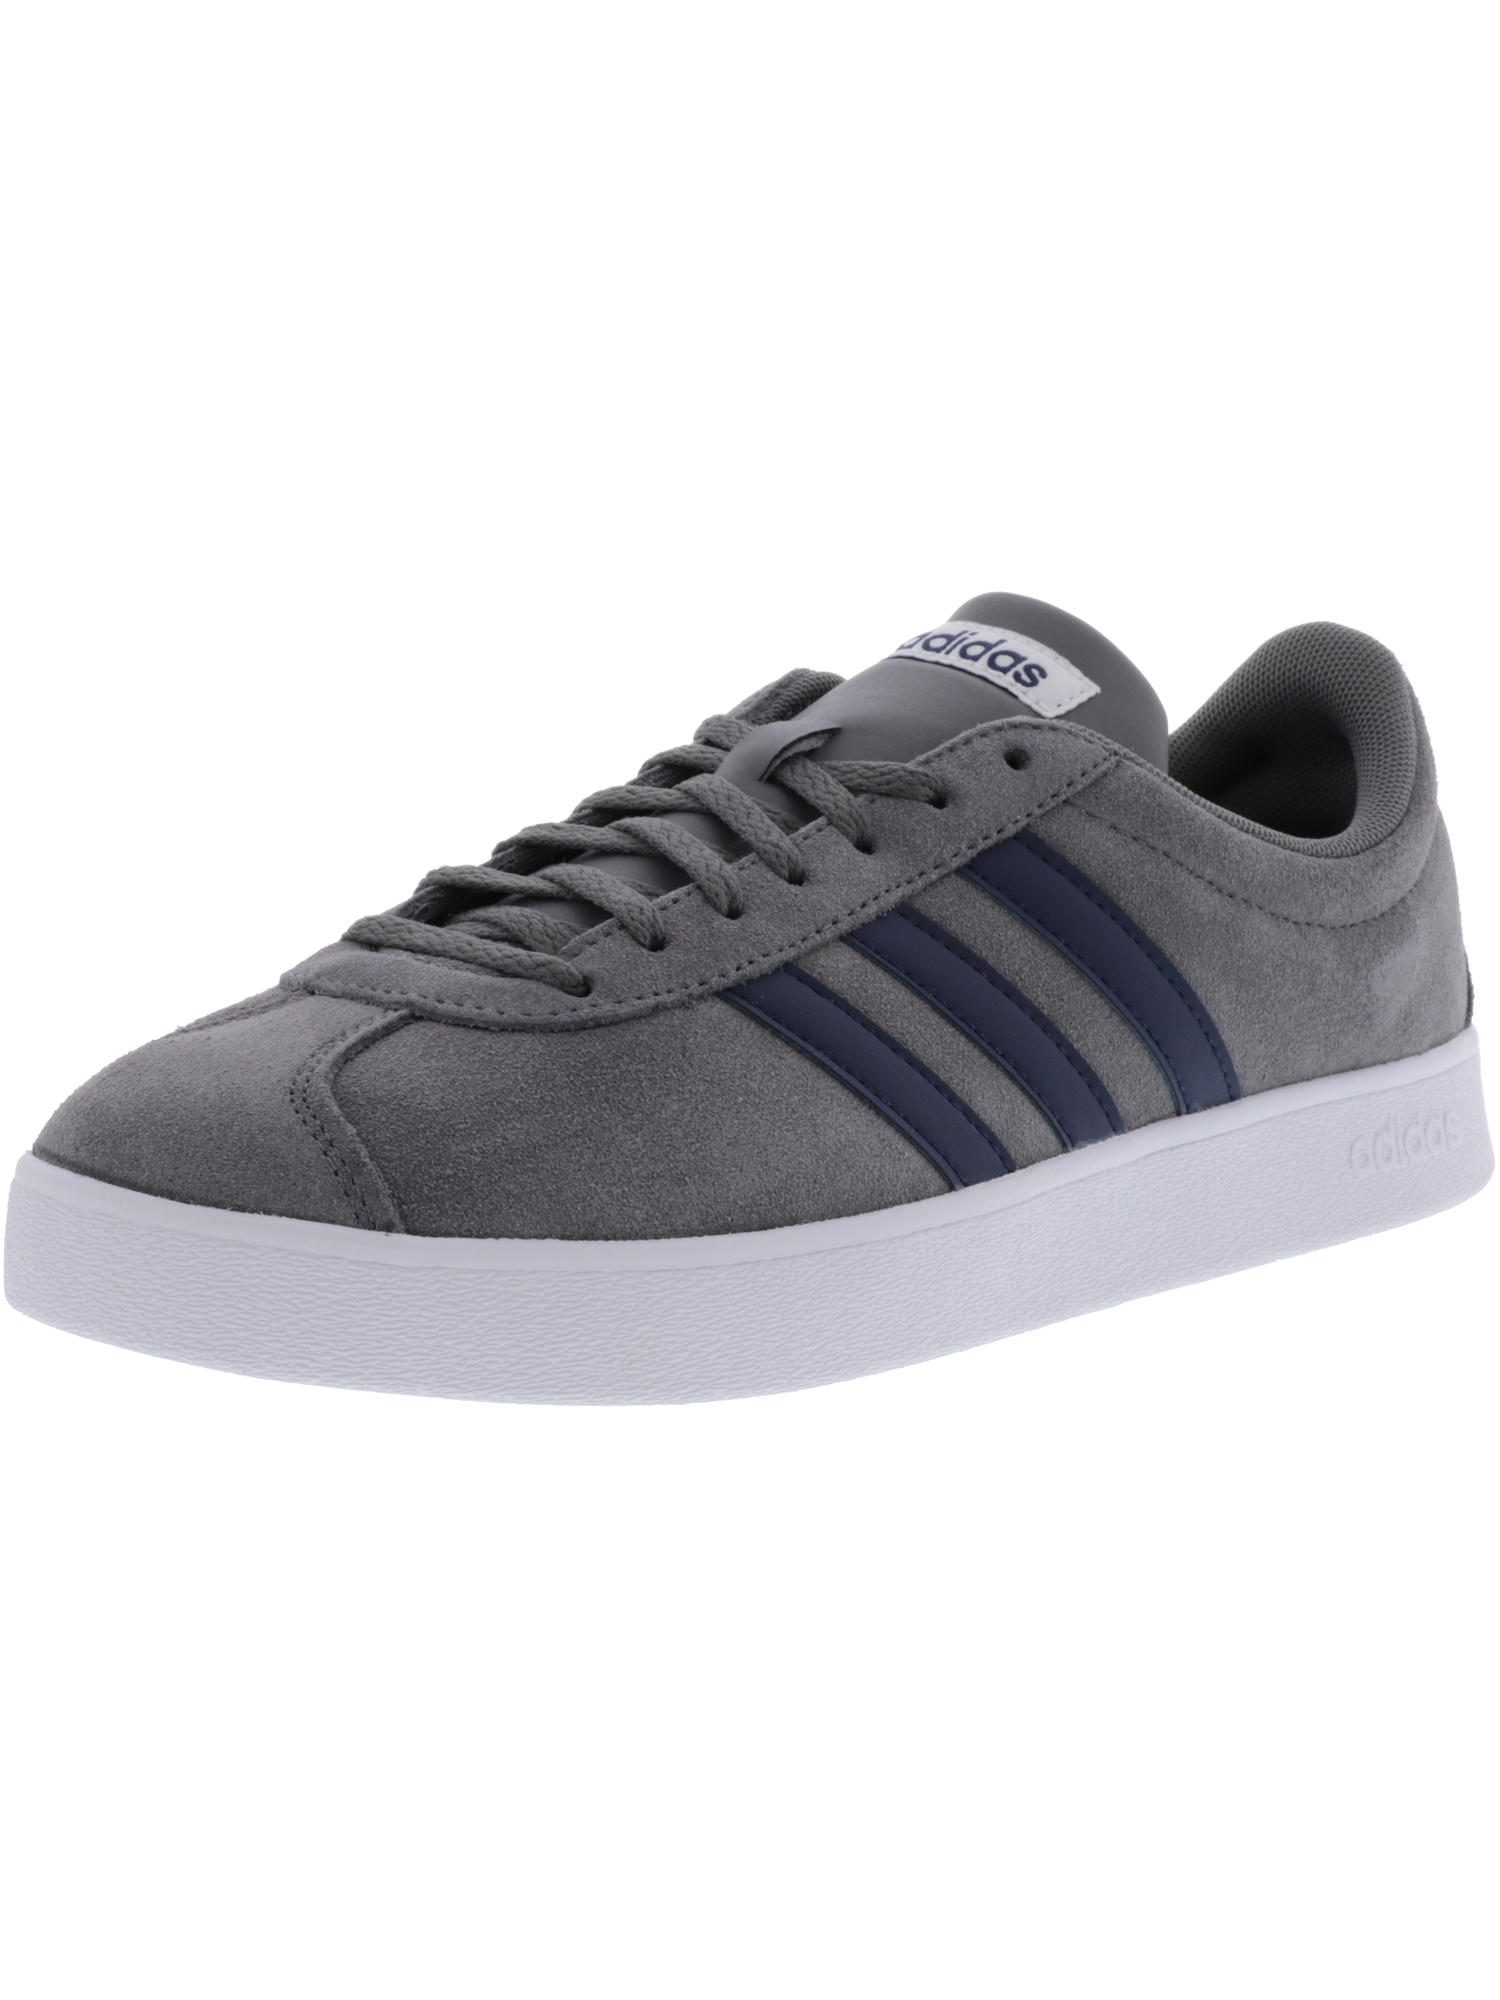 adidas originals high ankle sneakers